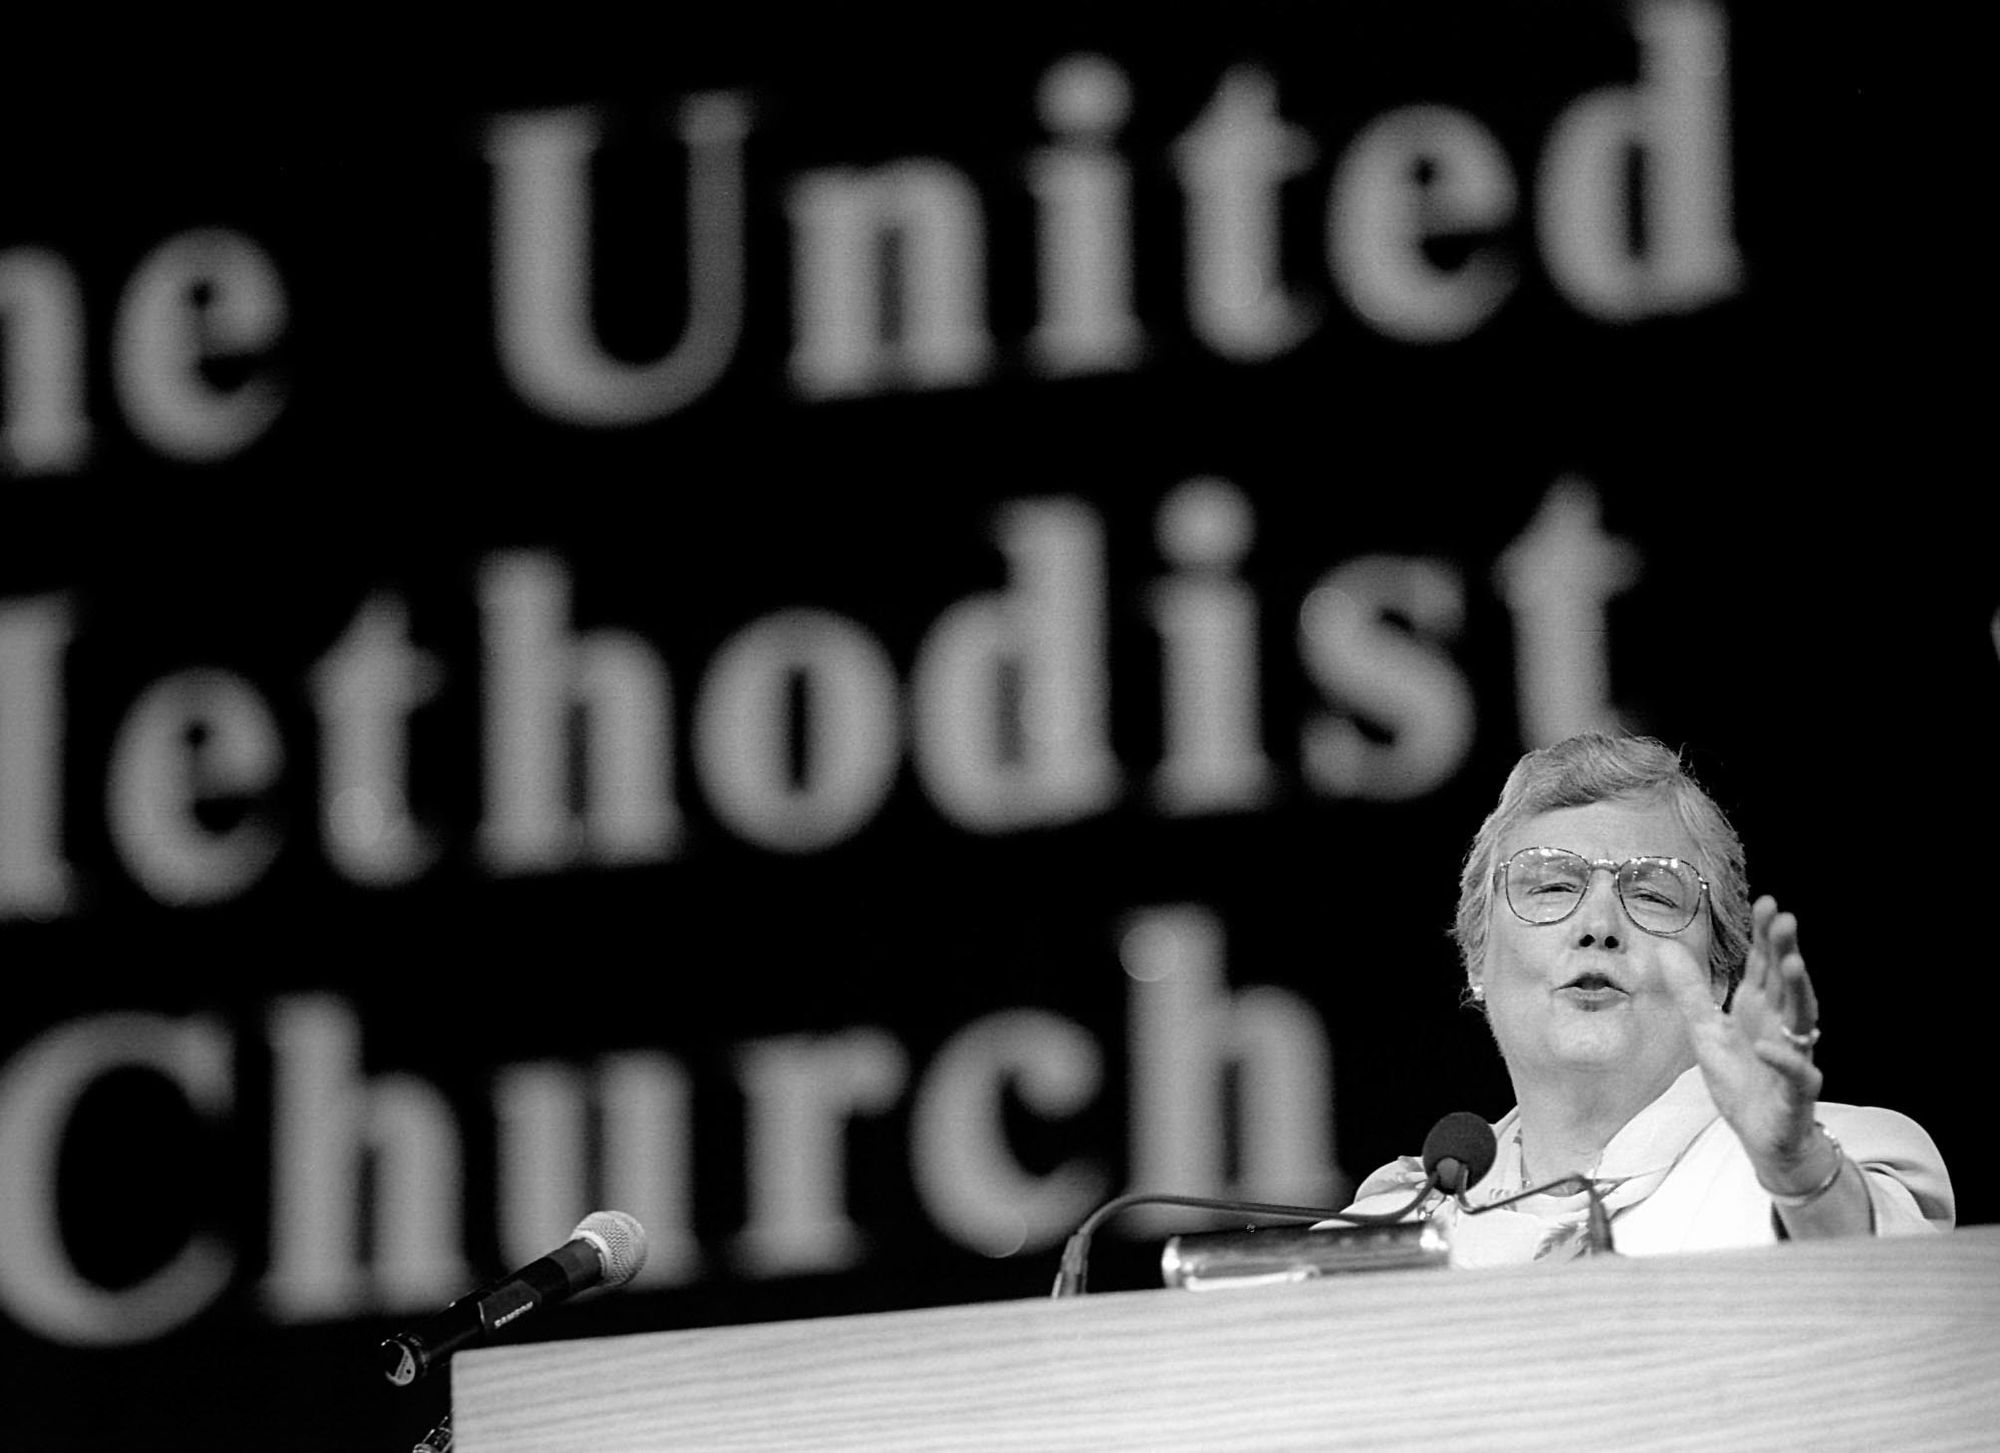 Bishop Judith Craig delivers the Episcopal Address at the 1996 United Methodist General Conference in Denver. Craig was the first woman invited by the Council of Bishops to give the address. File photo by Mike DuBose, UMNS.